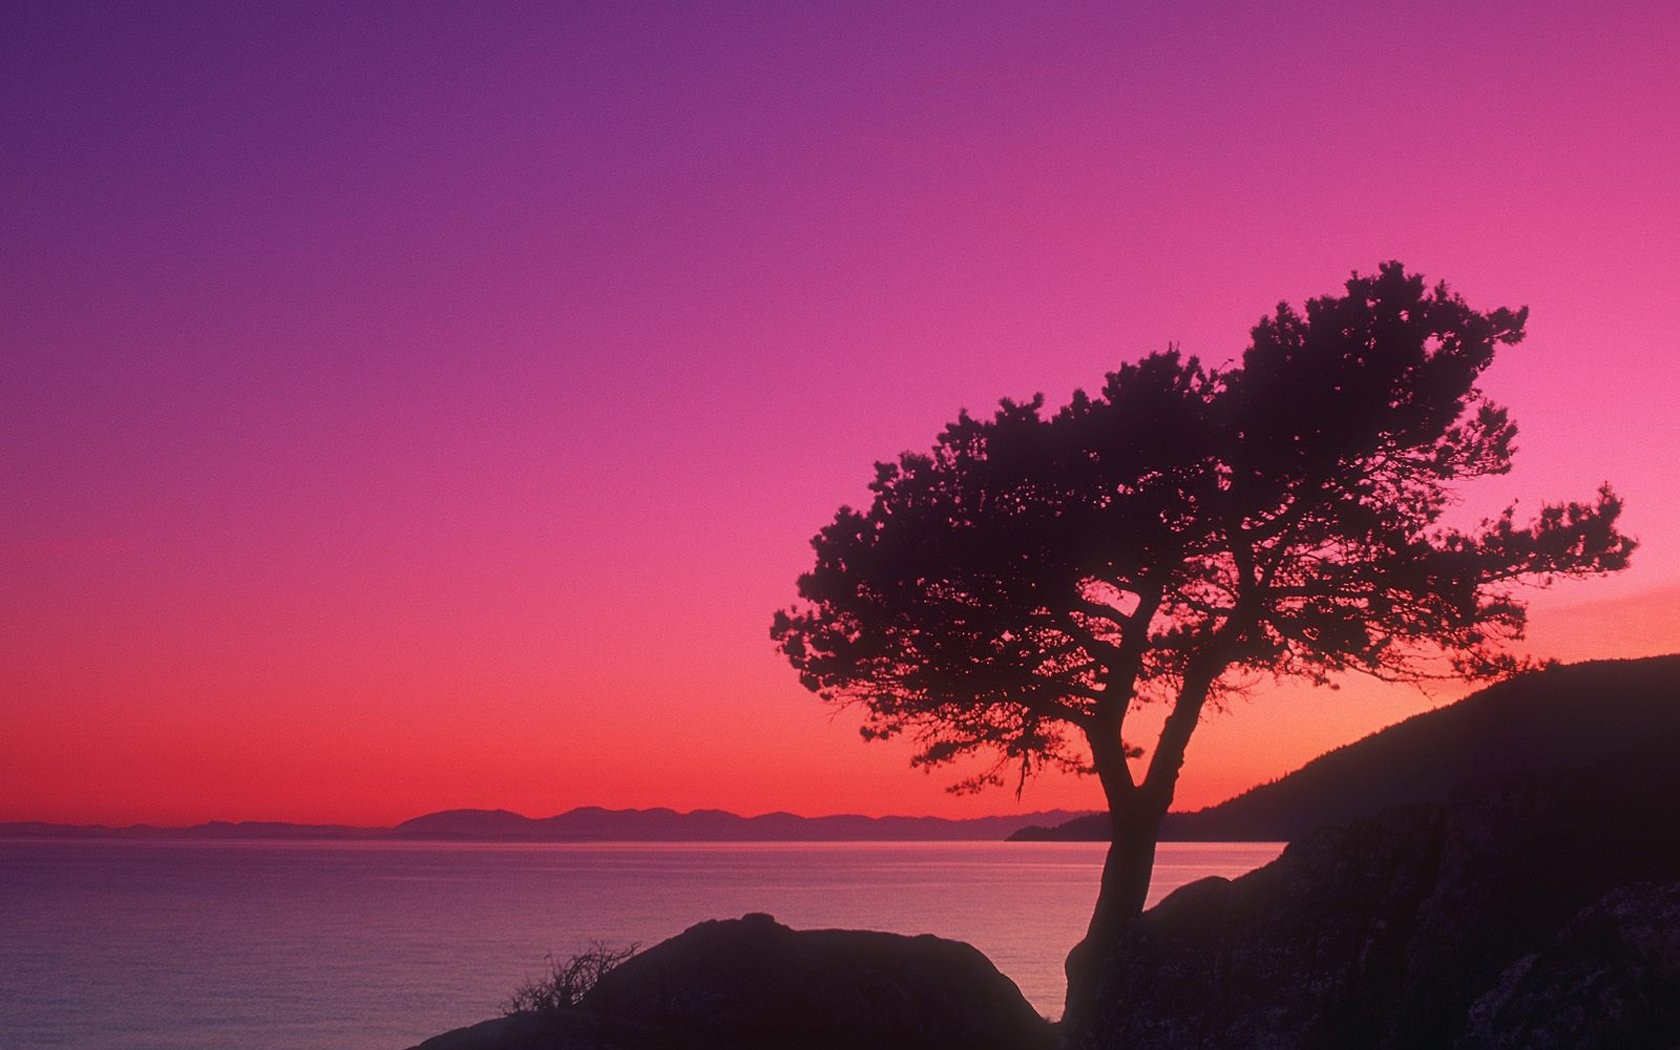  British Columbia colors Twilight Time of day wallpaper background